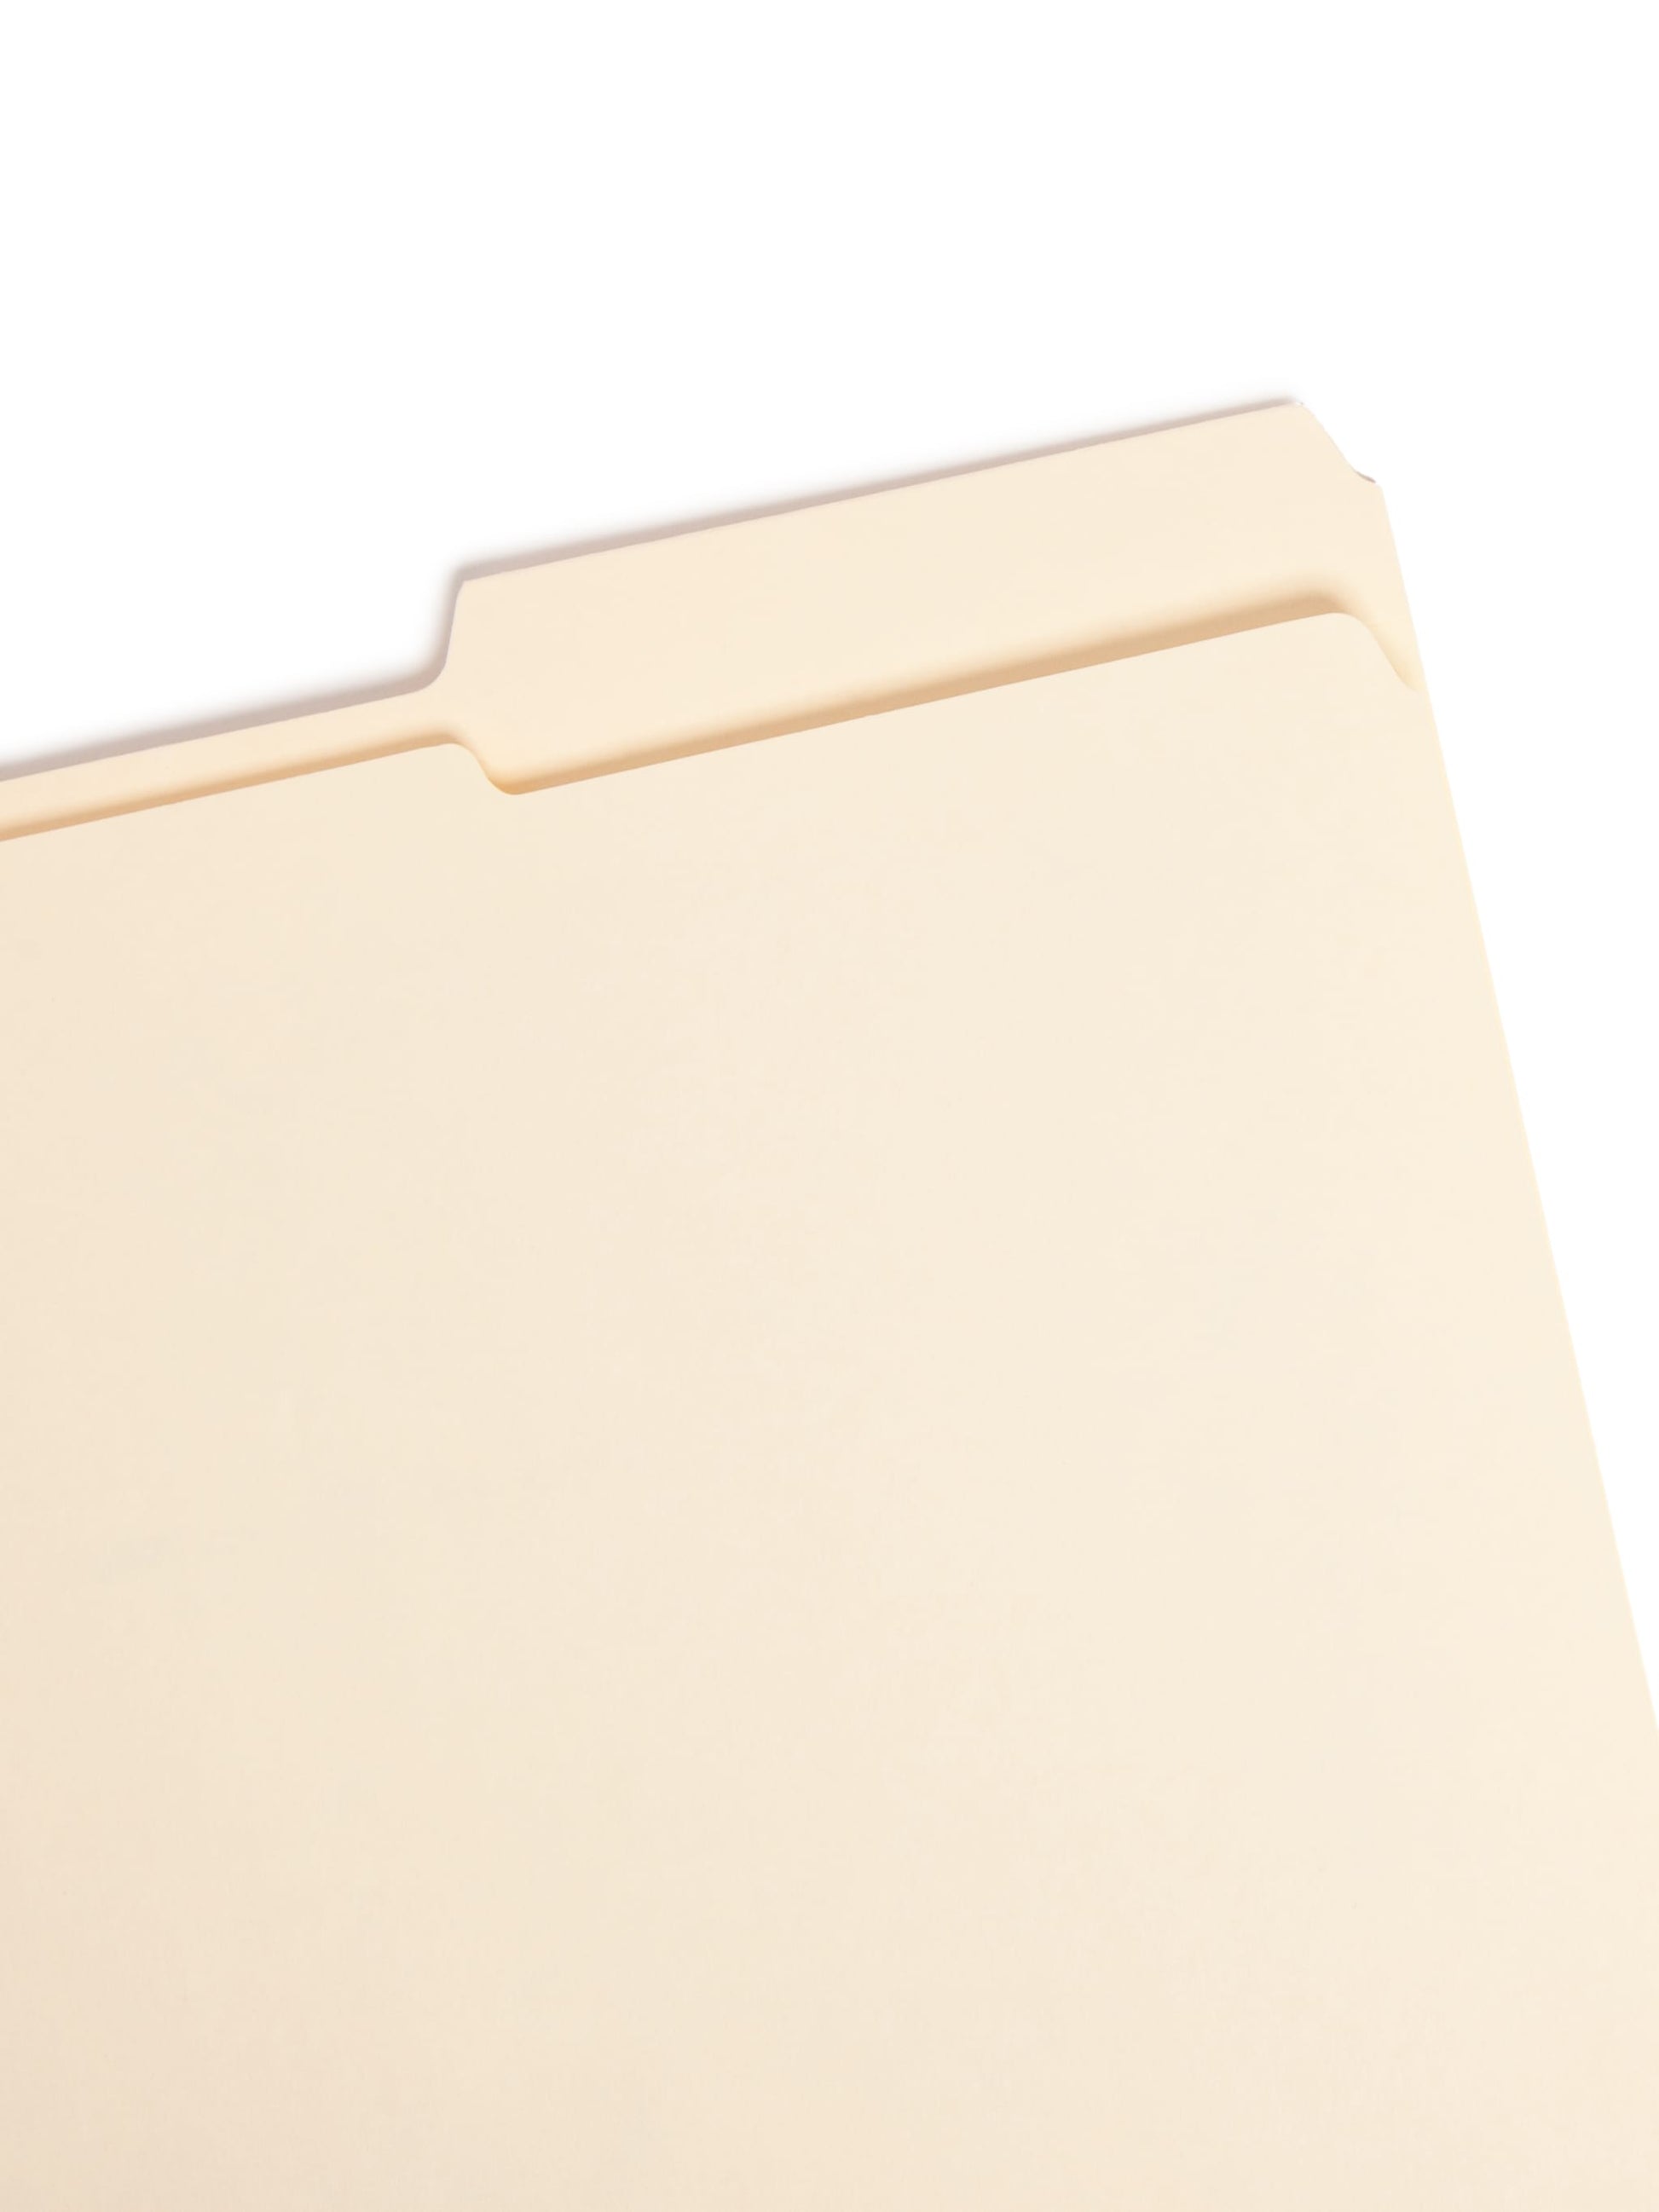 Reinforced Tab File Folders, 2/5-Cut Guide Height Right Tab, Manila Color, Letter Size, Set of 100, 086486103862